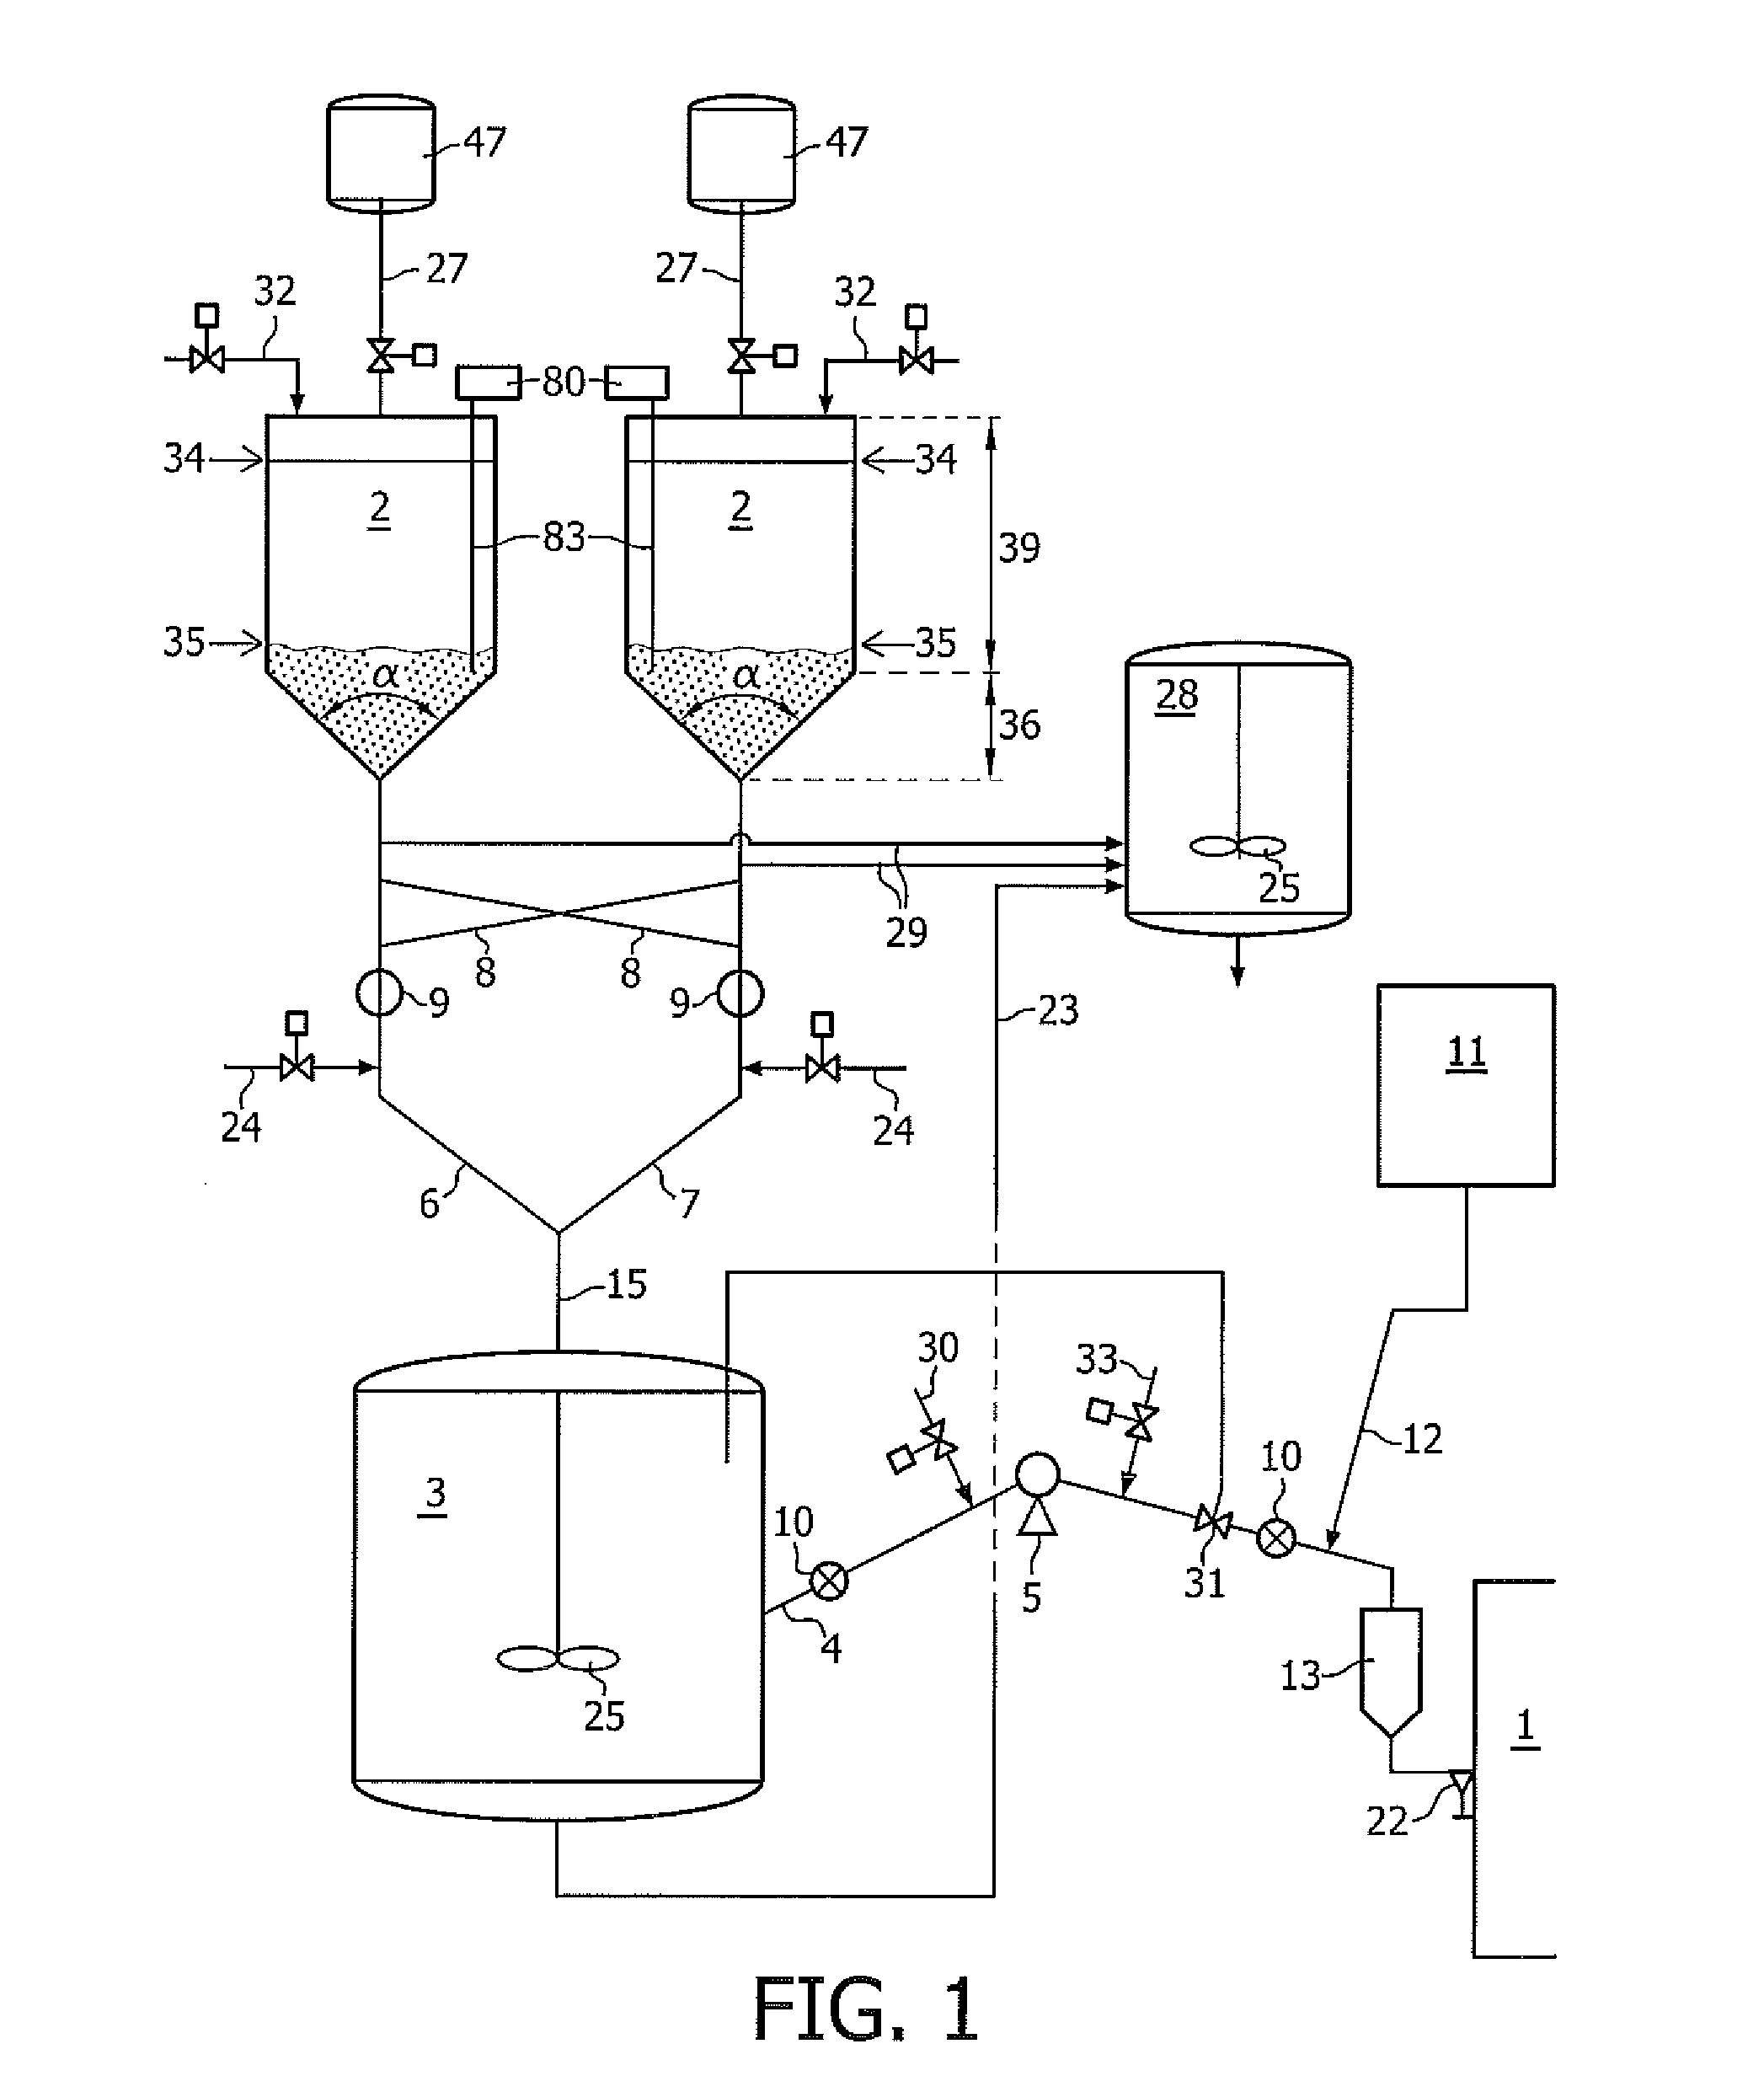 Method for replacing compatible ethylene polymerization catalysts